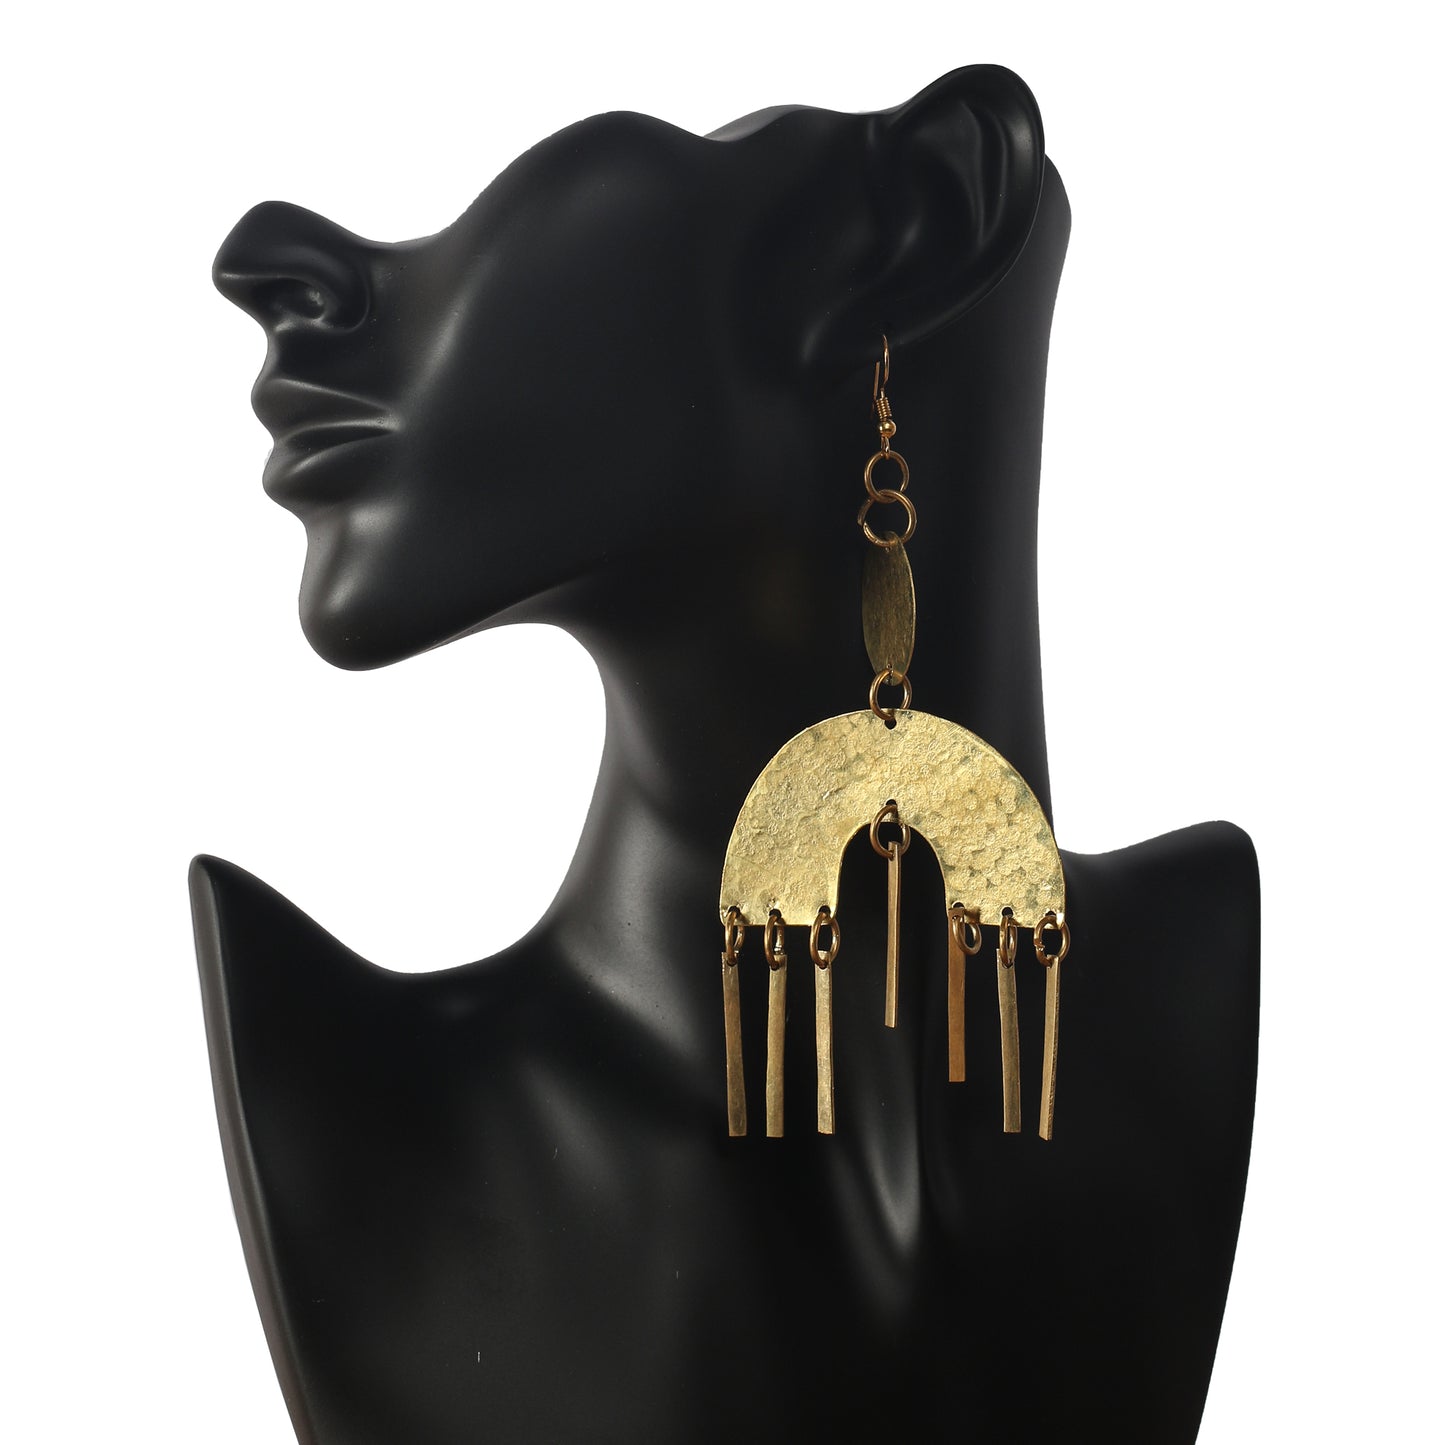 Gold Plated Earrings with Tassel Details